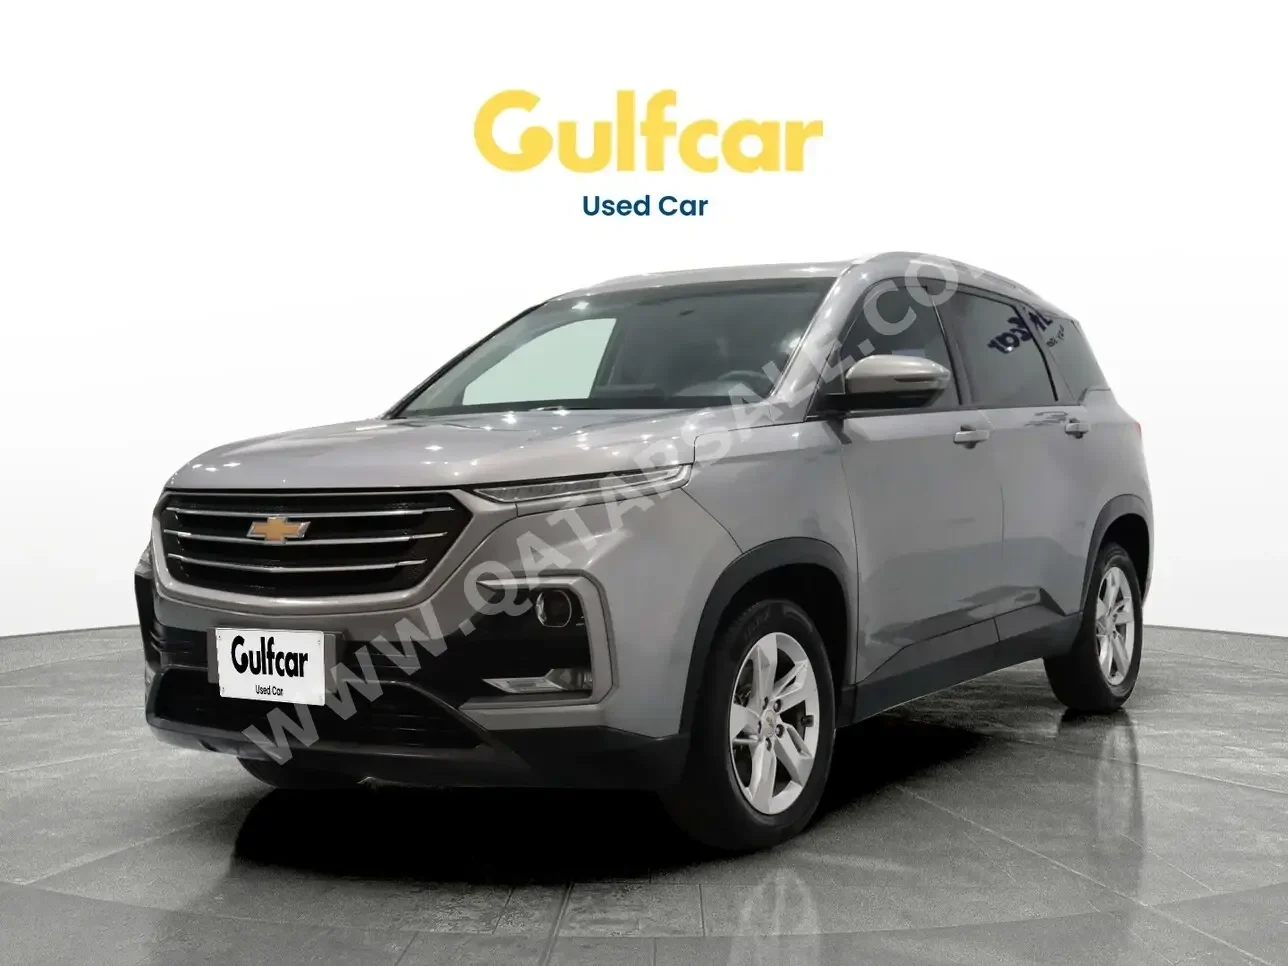 Chevrolet  Captiva  LS  2022  Automatic  50,846 Km  4 Cylinder  Front Wheel Drive (FWD)  SUV  Gray